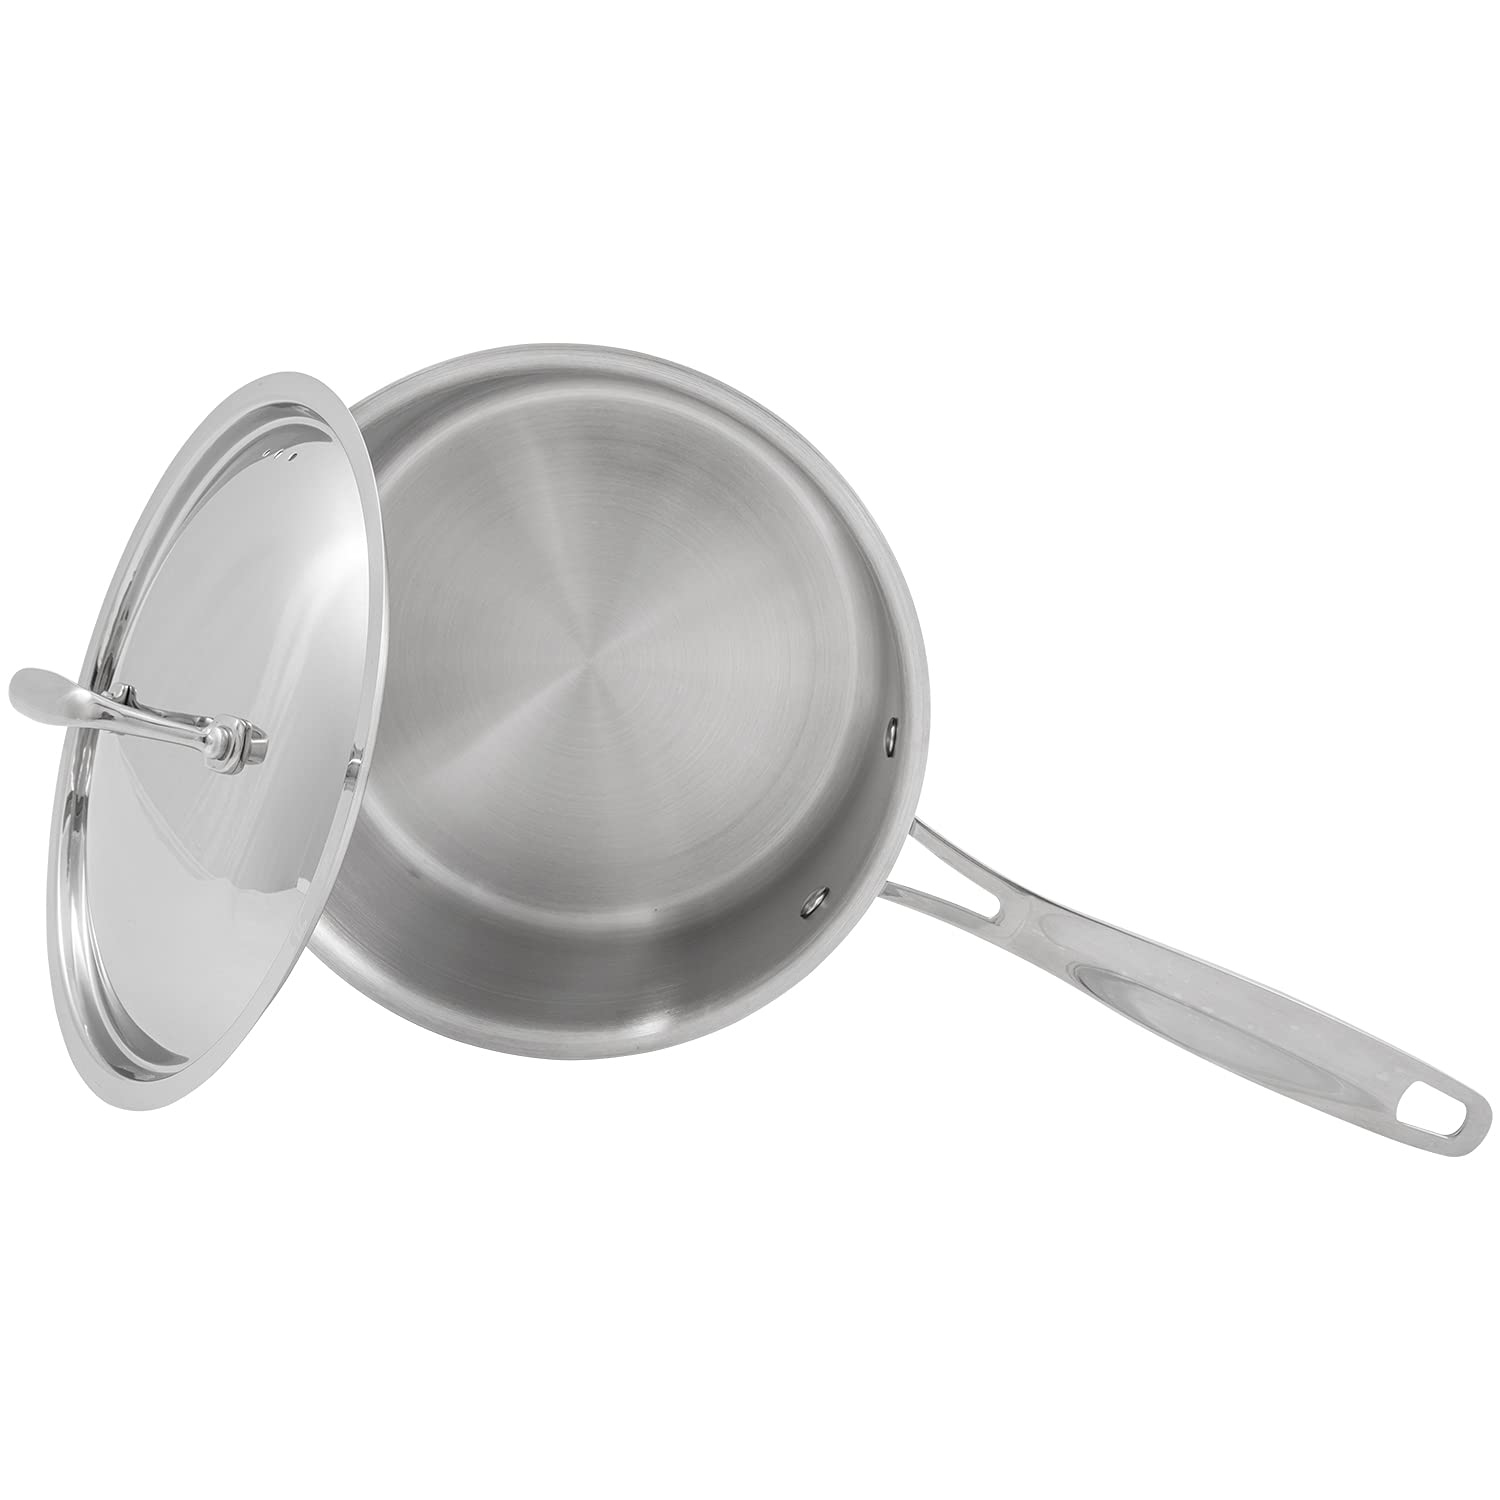 Nuwave Commercial 3-Quart Stainless Steel Saucepan with Vented Lid, Tri-Ply Construction, Premium 18/10 Stainless Steel